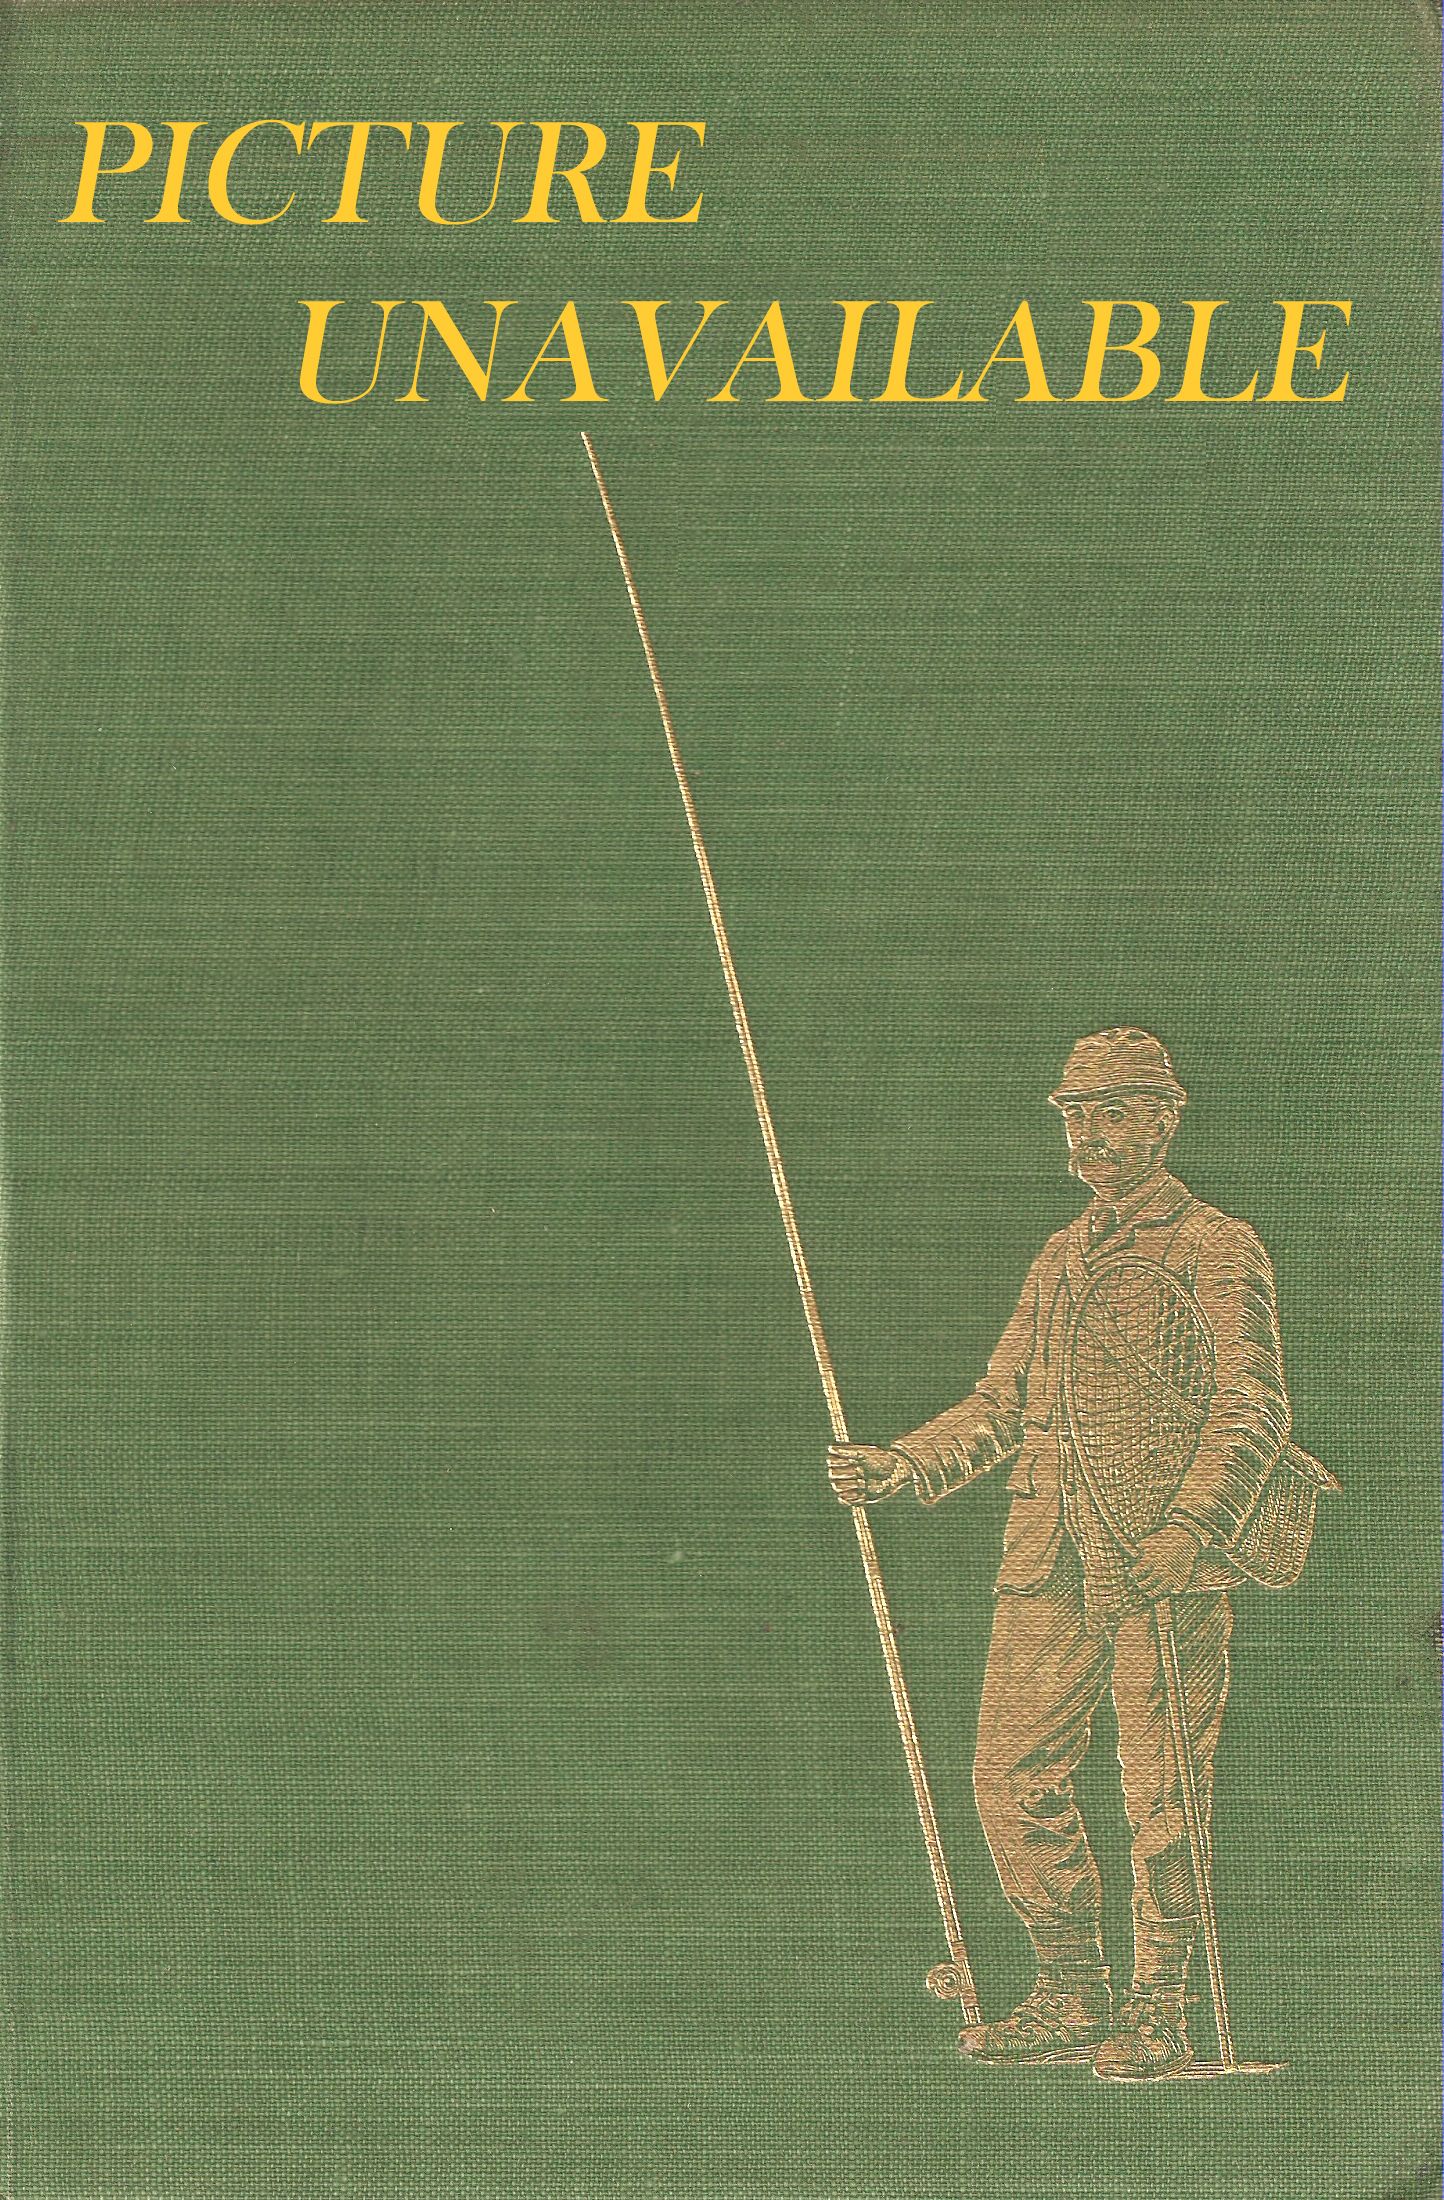 THE NATURAL TROUT FLY AND ITS IMITATION: BEING AN ANGLER'S RECORD OF INSECTS SEEN AT THE WATERSIDE AND THE METHOD OF TYING THEIR FLIES. By Leonard West. Second edition, revised and enlarged.